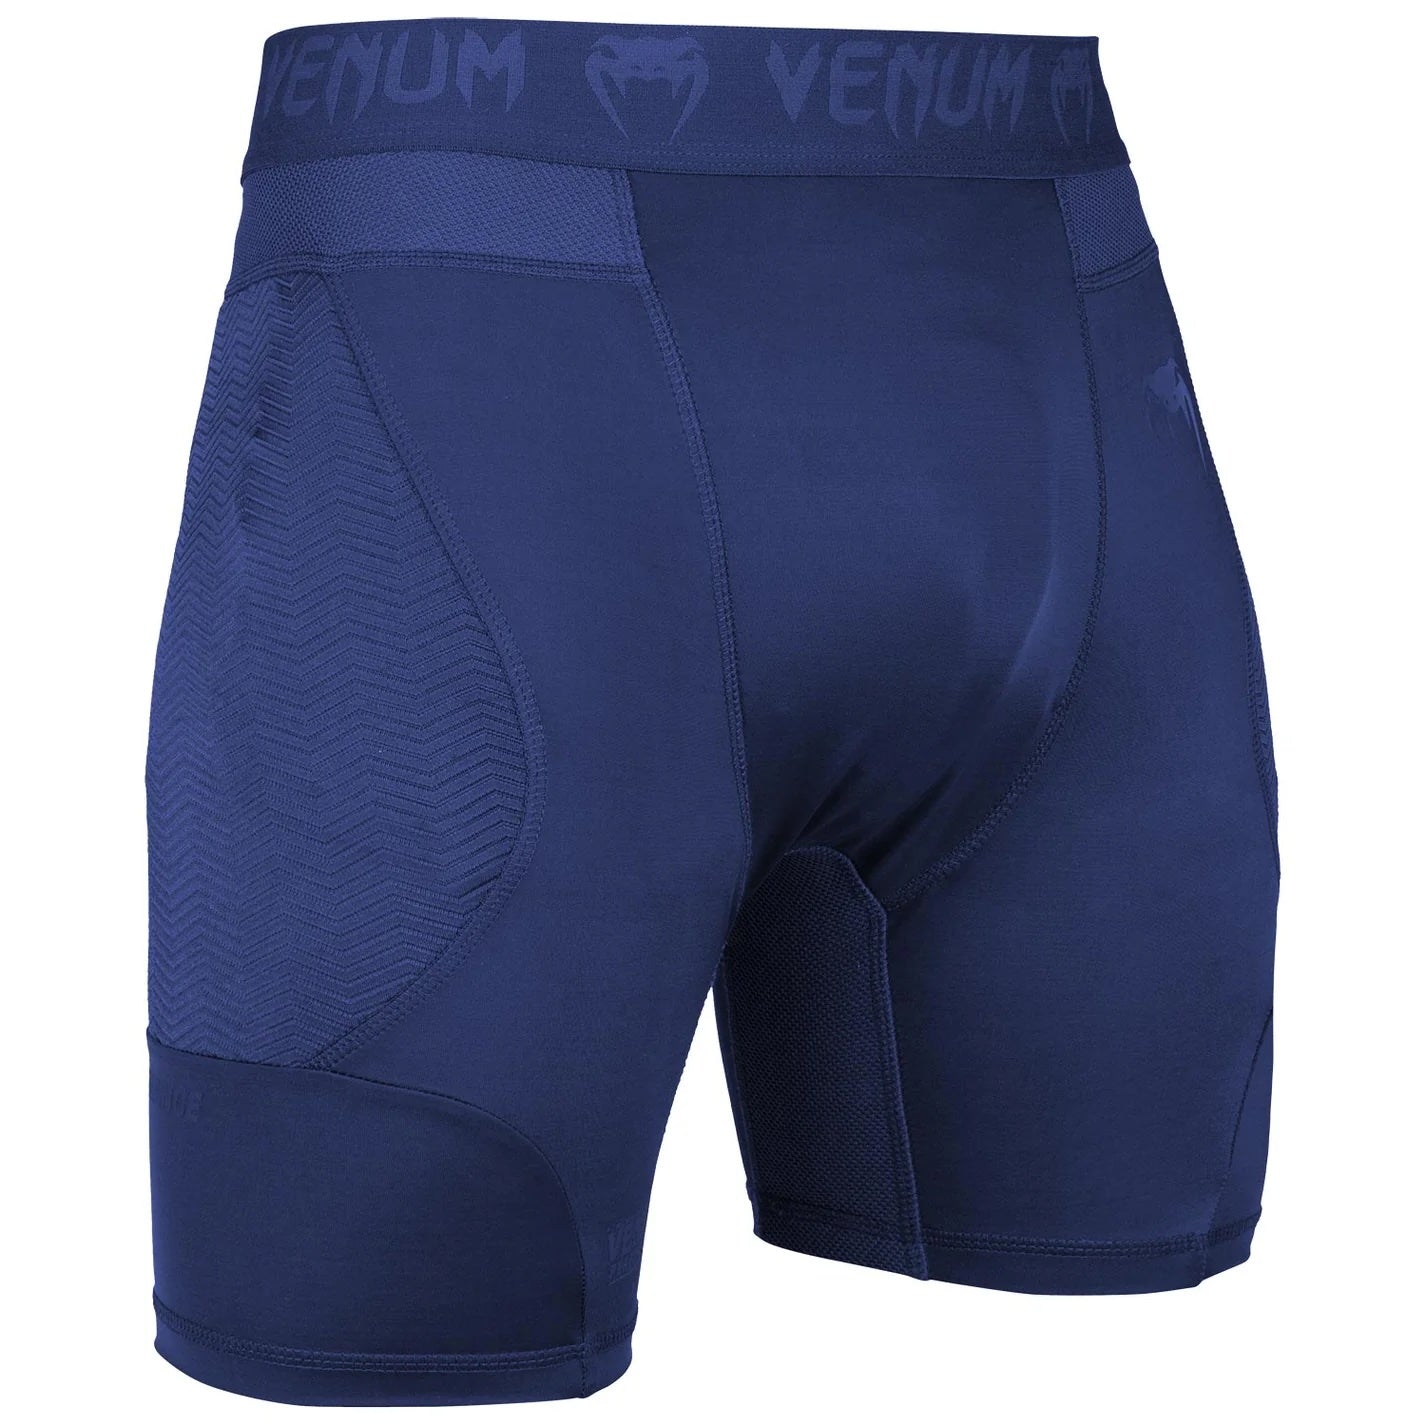 G-Fit Compression Shorts - Navy Blue